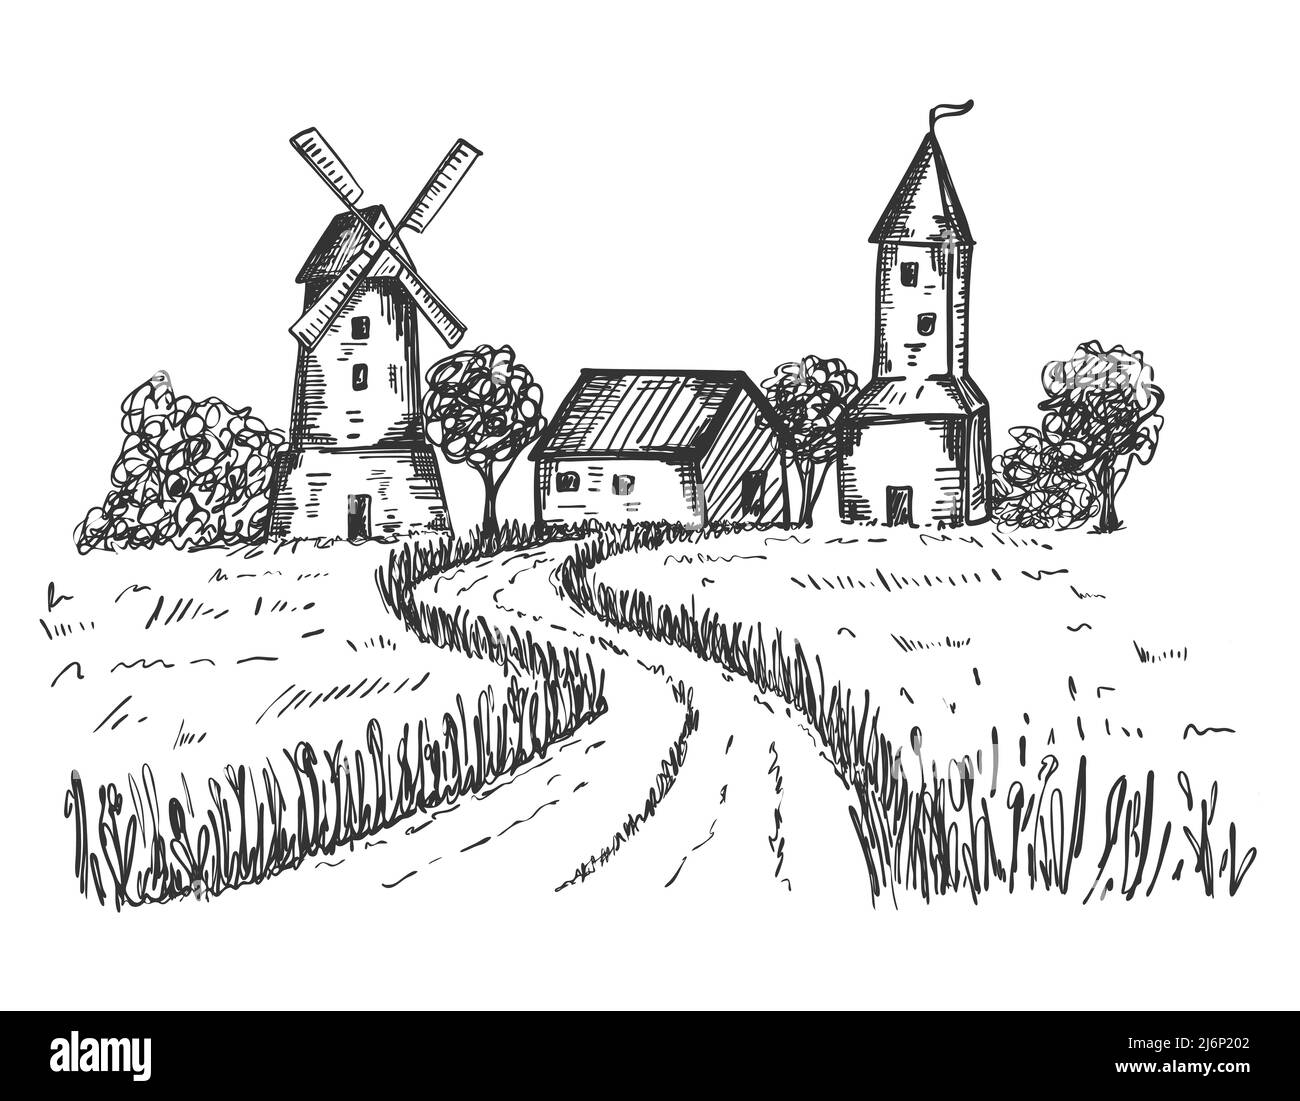 Sketch of a rural landscape. The road leading to the farm, houses, mill through a wheat field. Good for packaging eco-friendly, natural food. Engraved Stock Vector